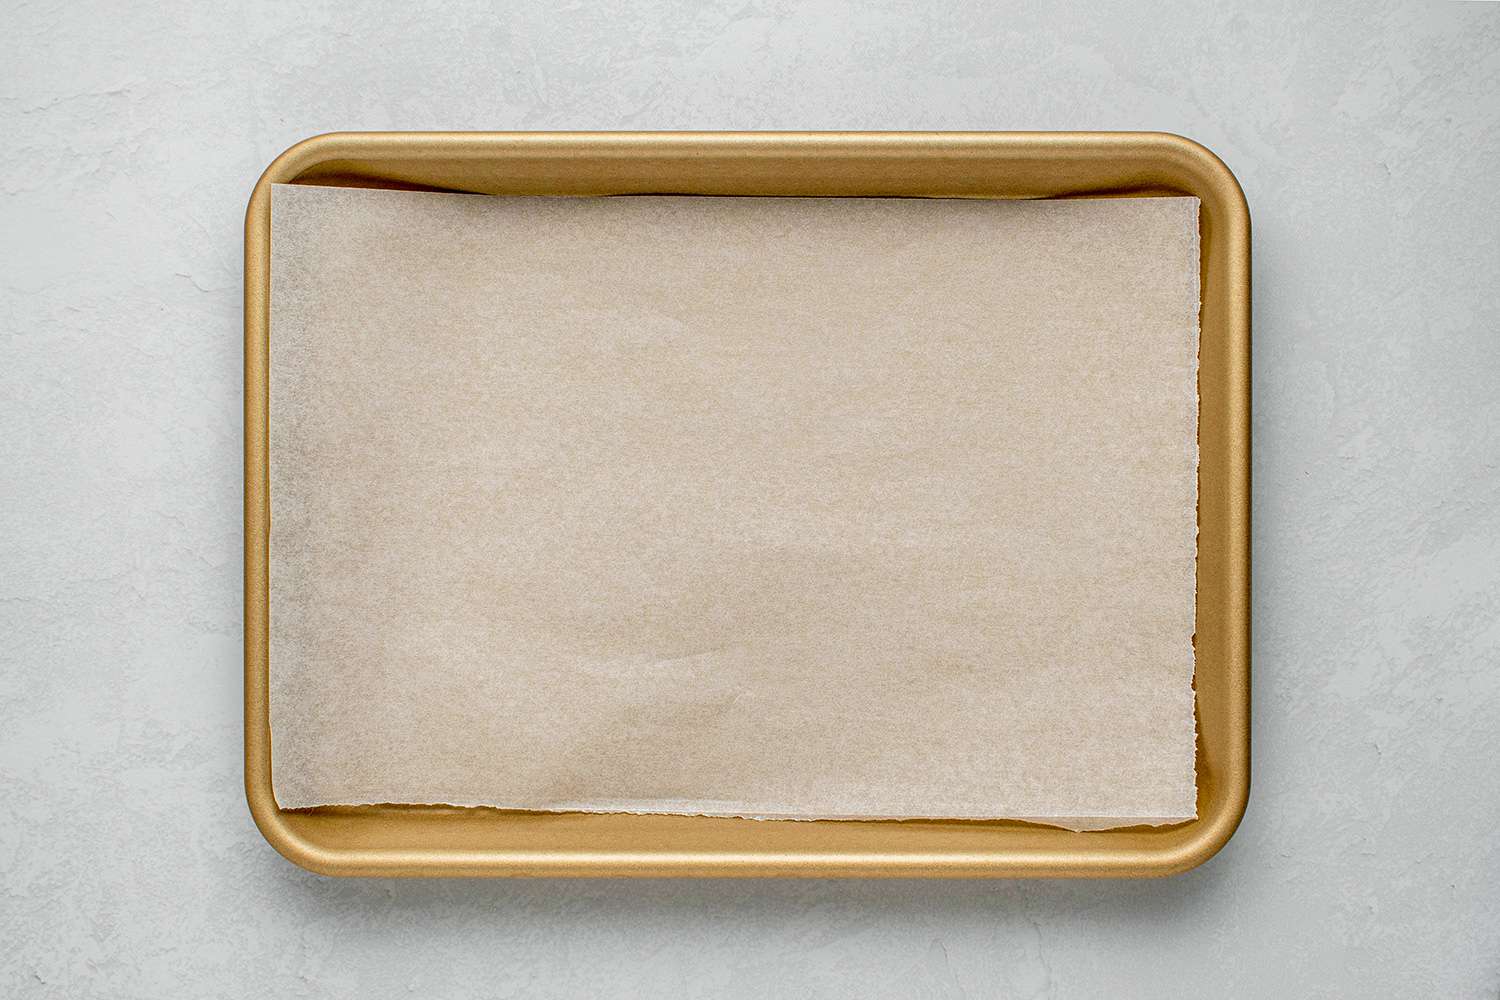 baking sheet lined with parchment paper